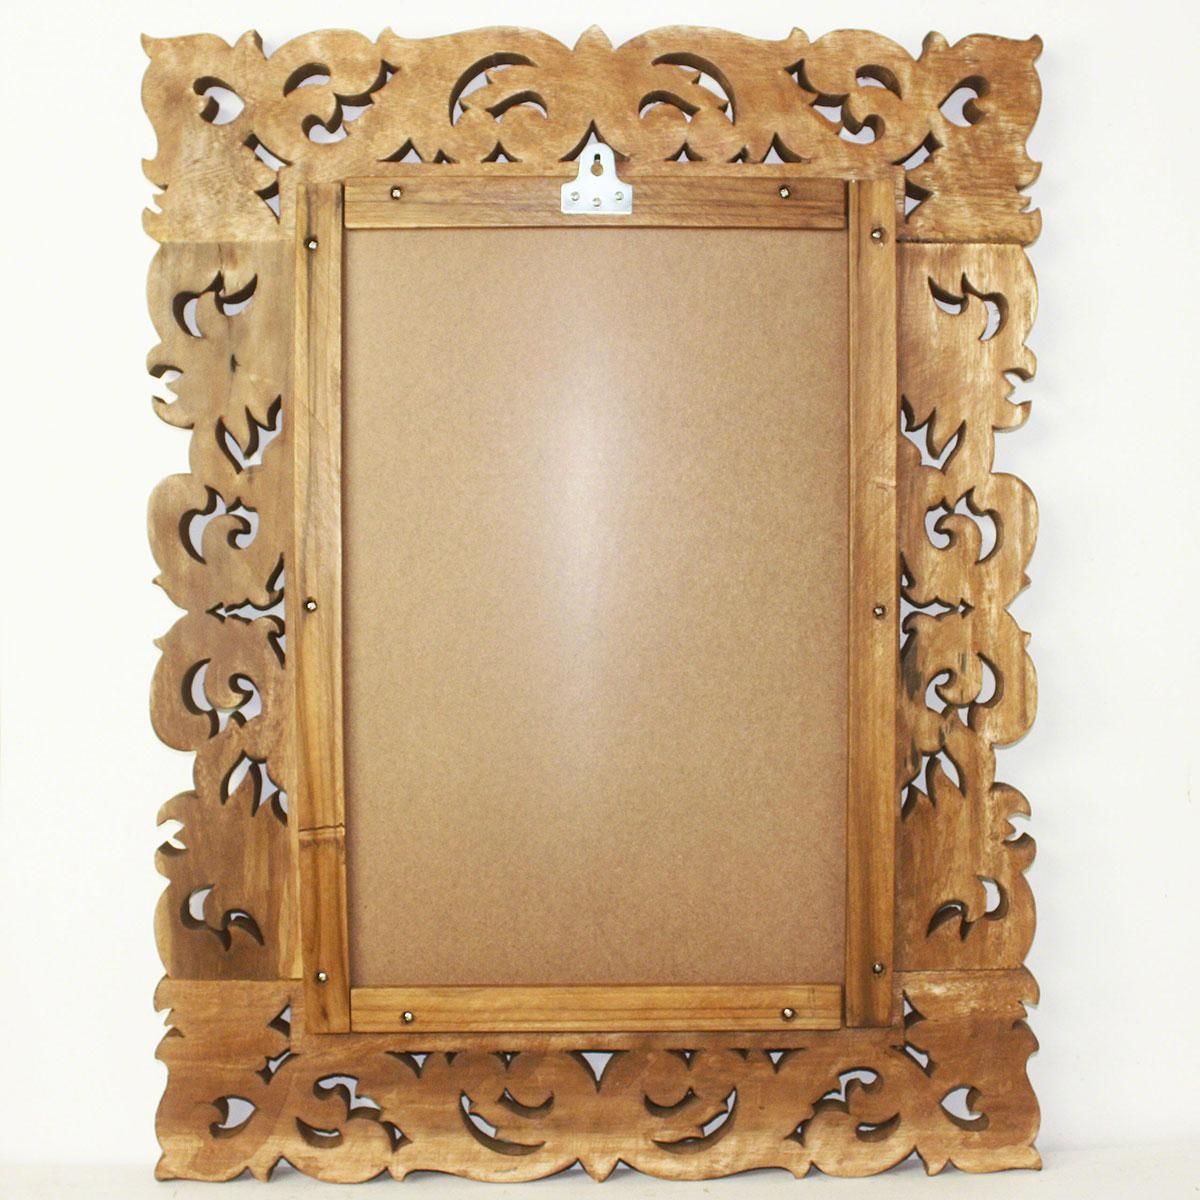 View Decorative Wooden Mirrors Home Design Awesome Gallery And In Decorative Wooden Mirrors (View 18 of 20)